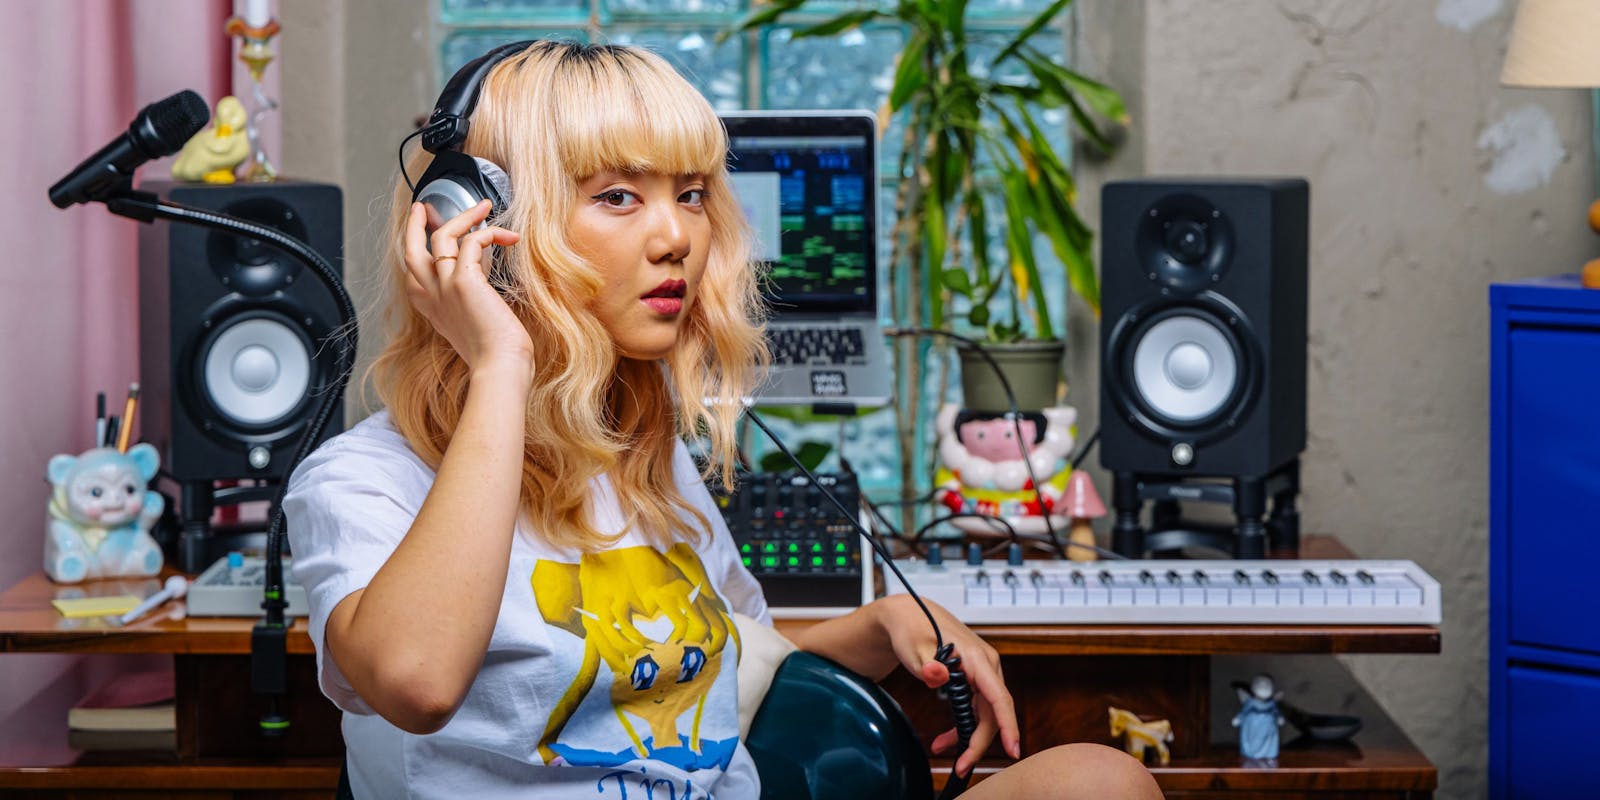 Blonde woman with headphones at her workstation